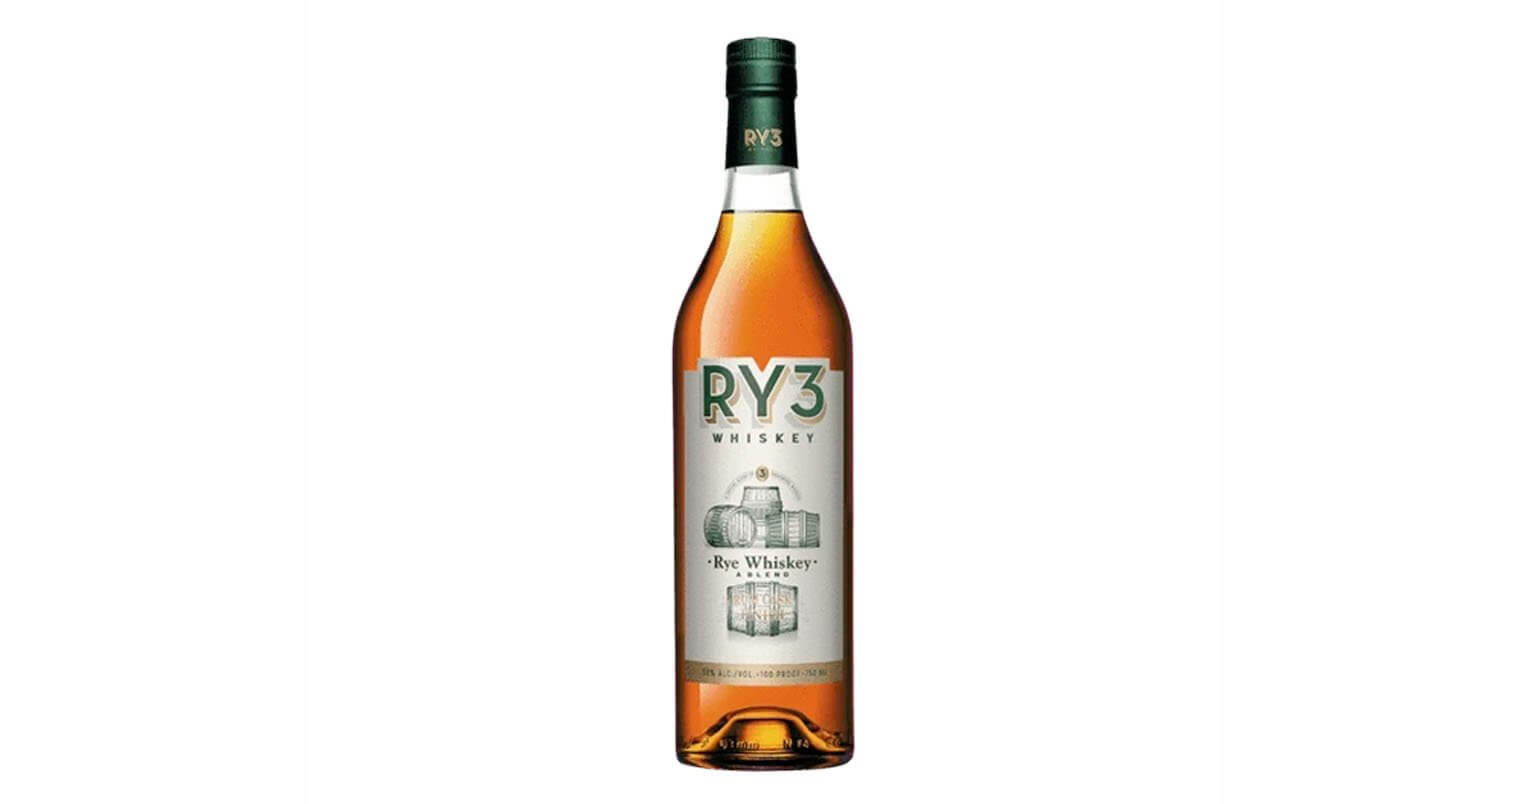 RY3 Whiskey, featured image